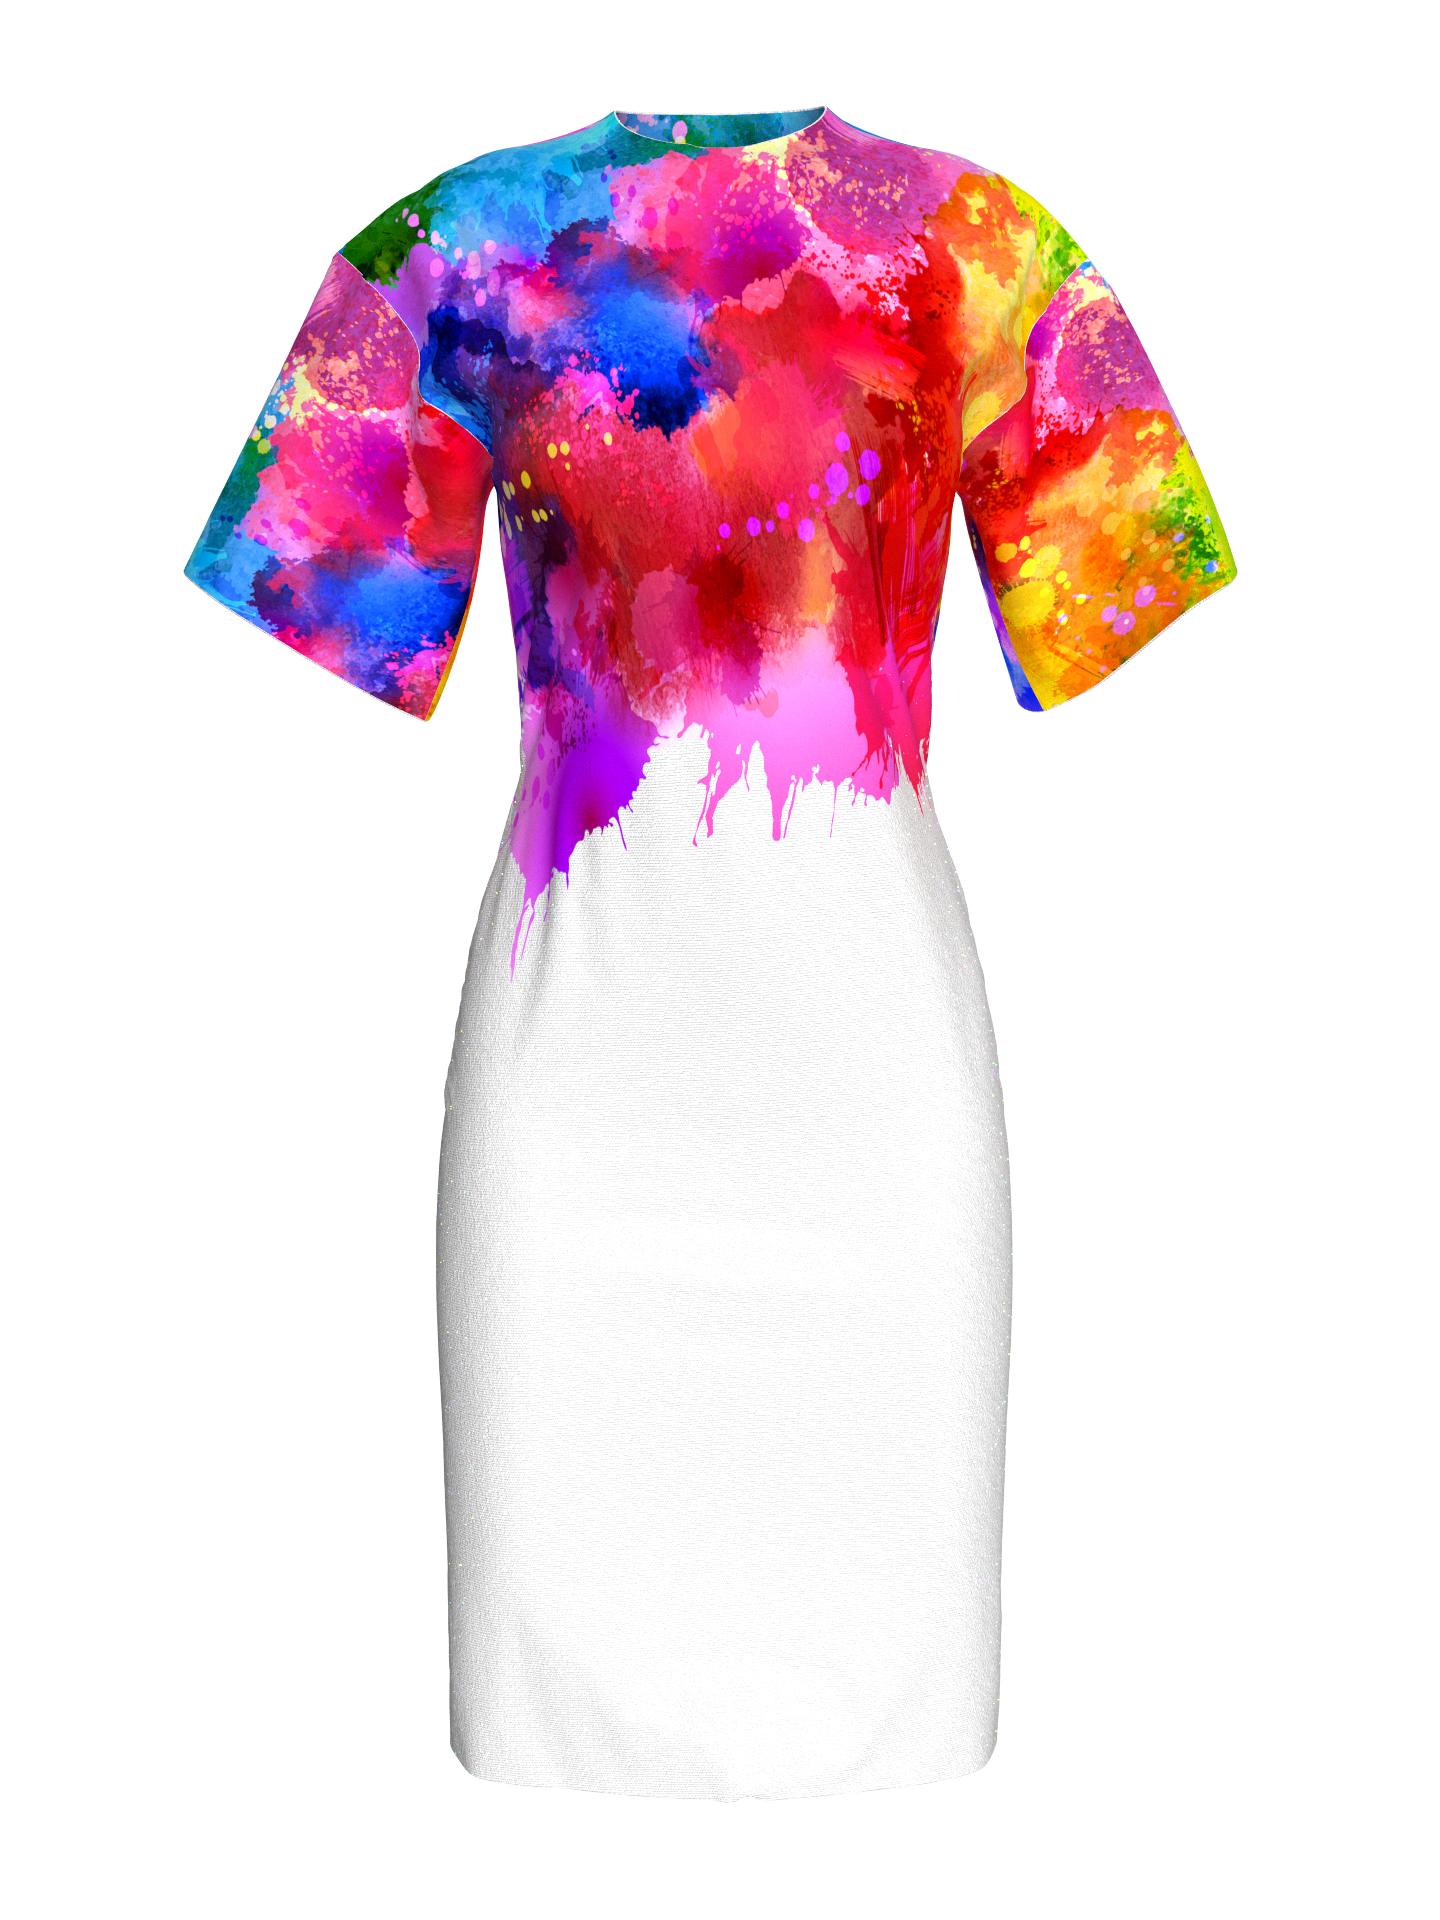 Dress - color splash on white by SDGS INSPIRED COLLECTION